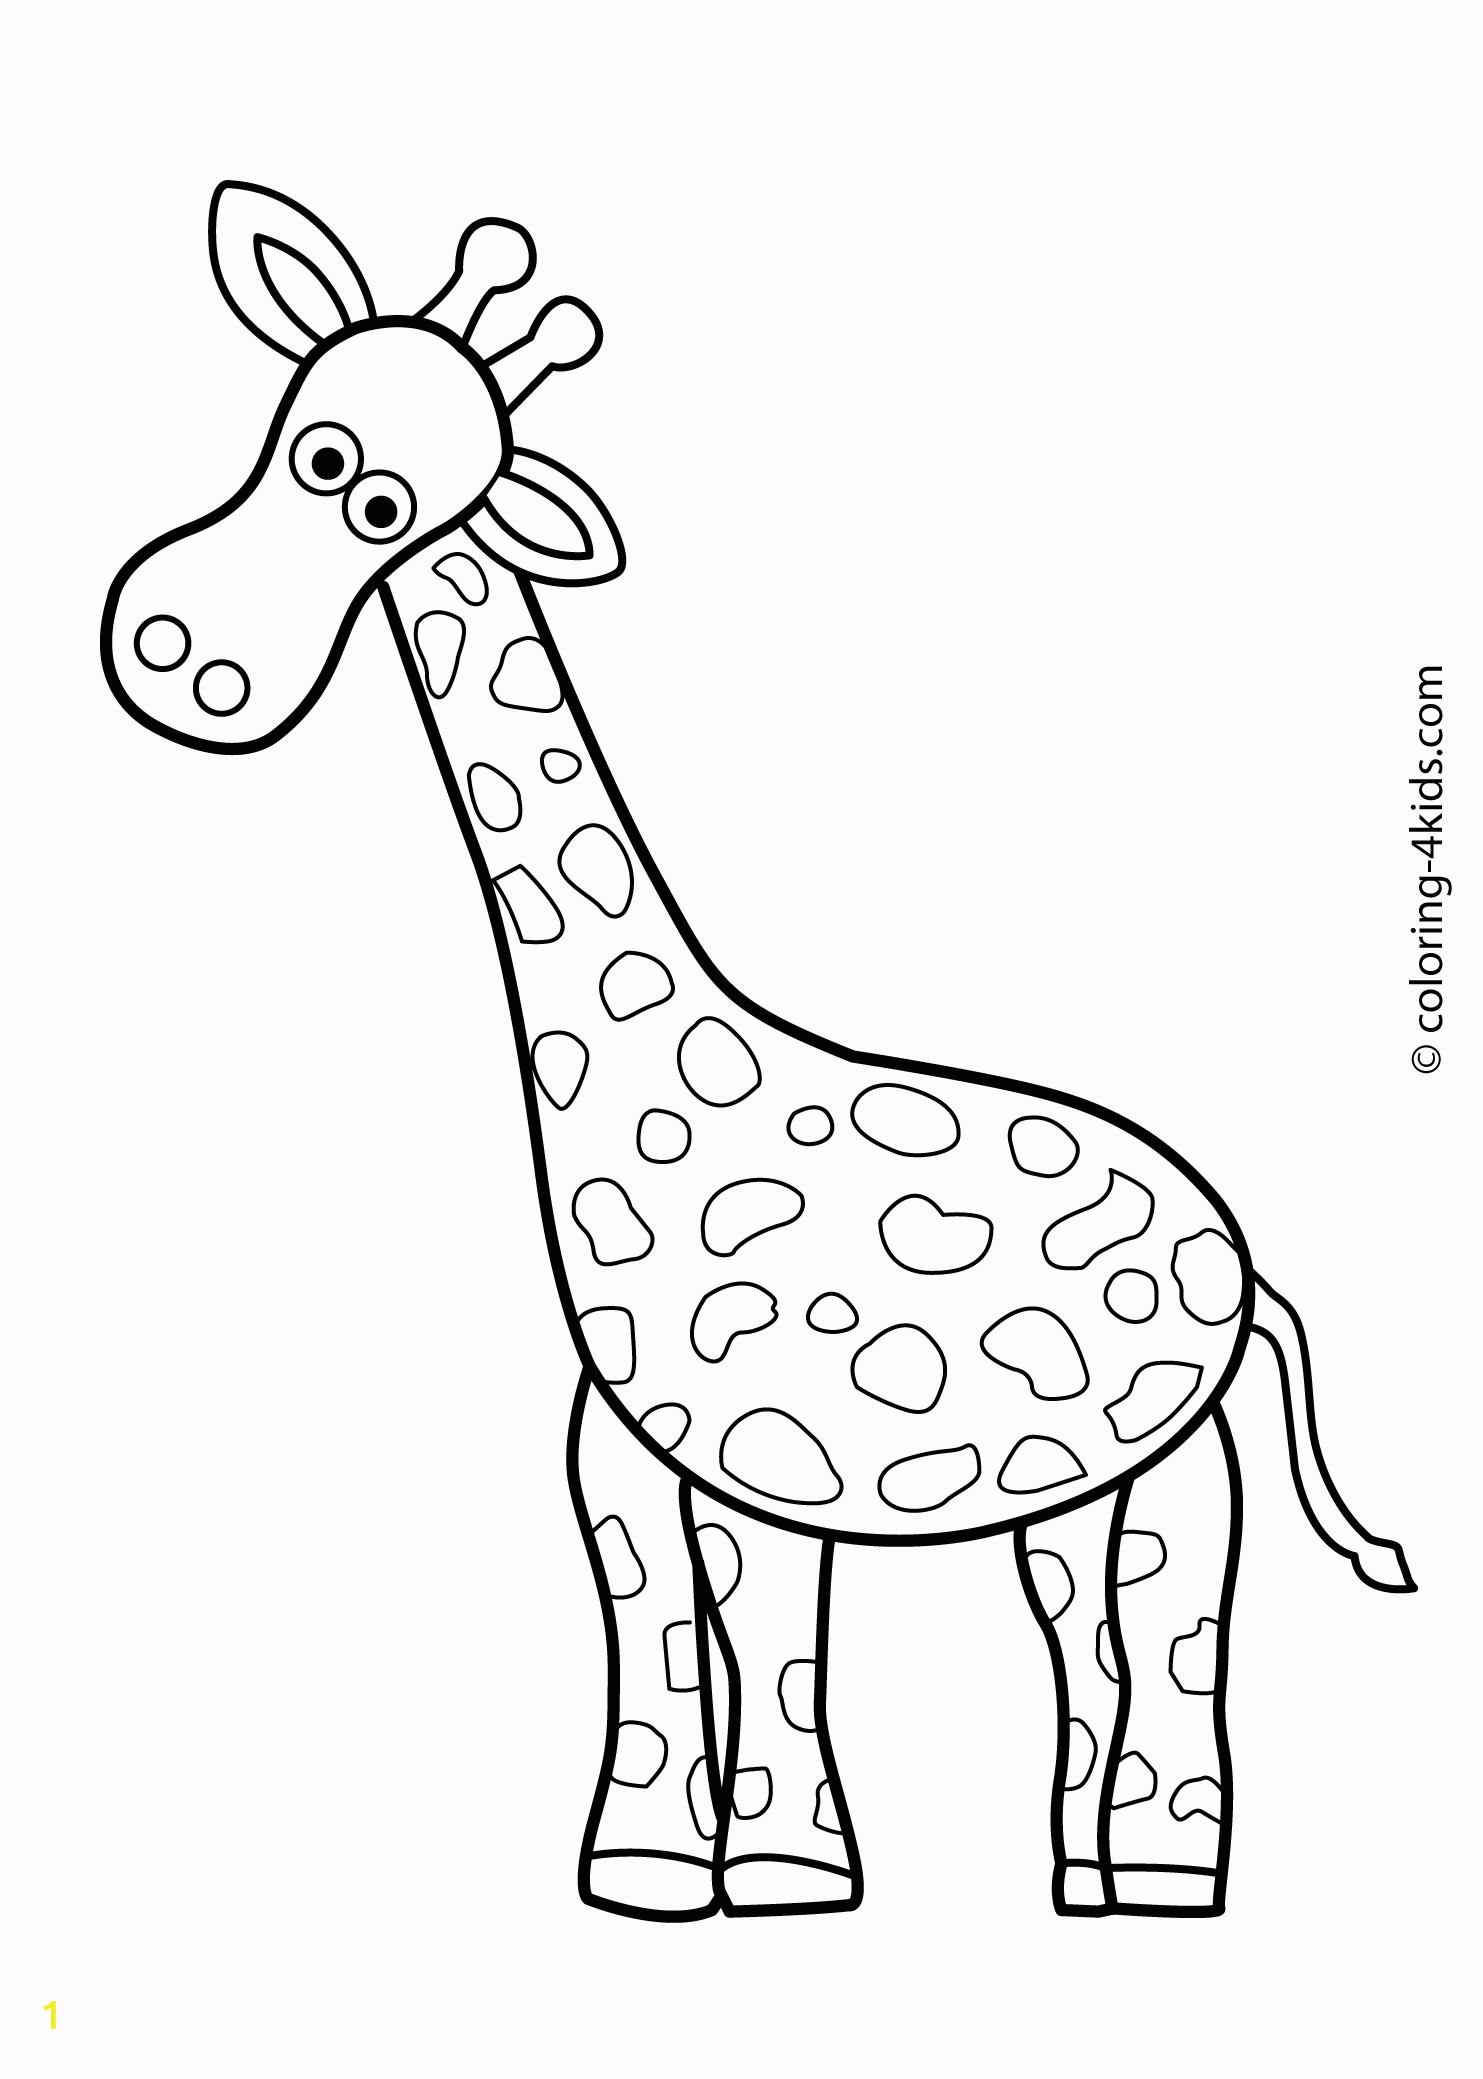 Zoo Animal Coloring Pages Printable Animals Coloring Pages for Kids Giraffe Coloring Pages for